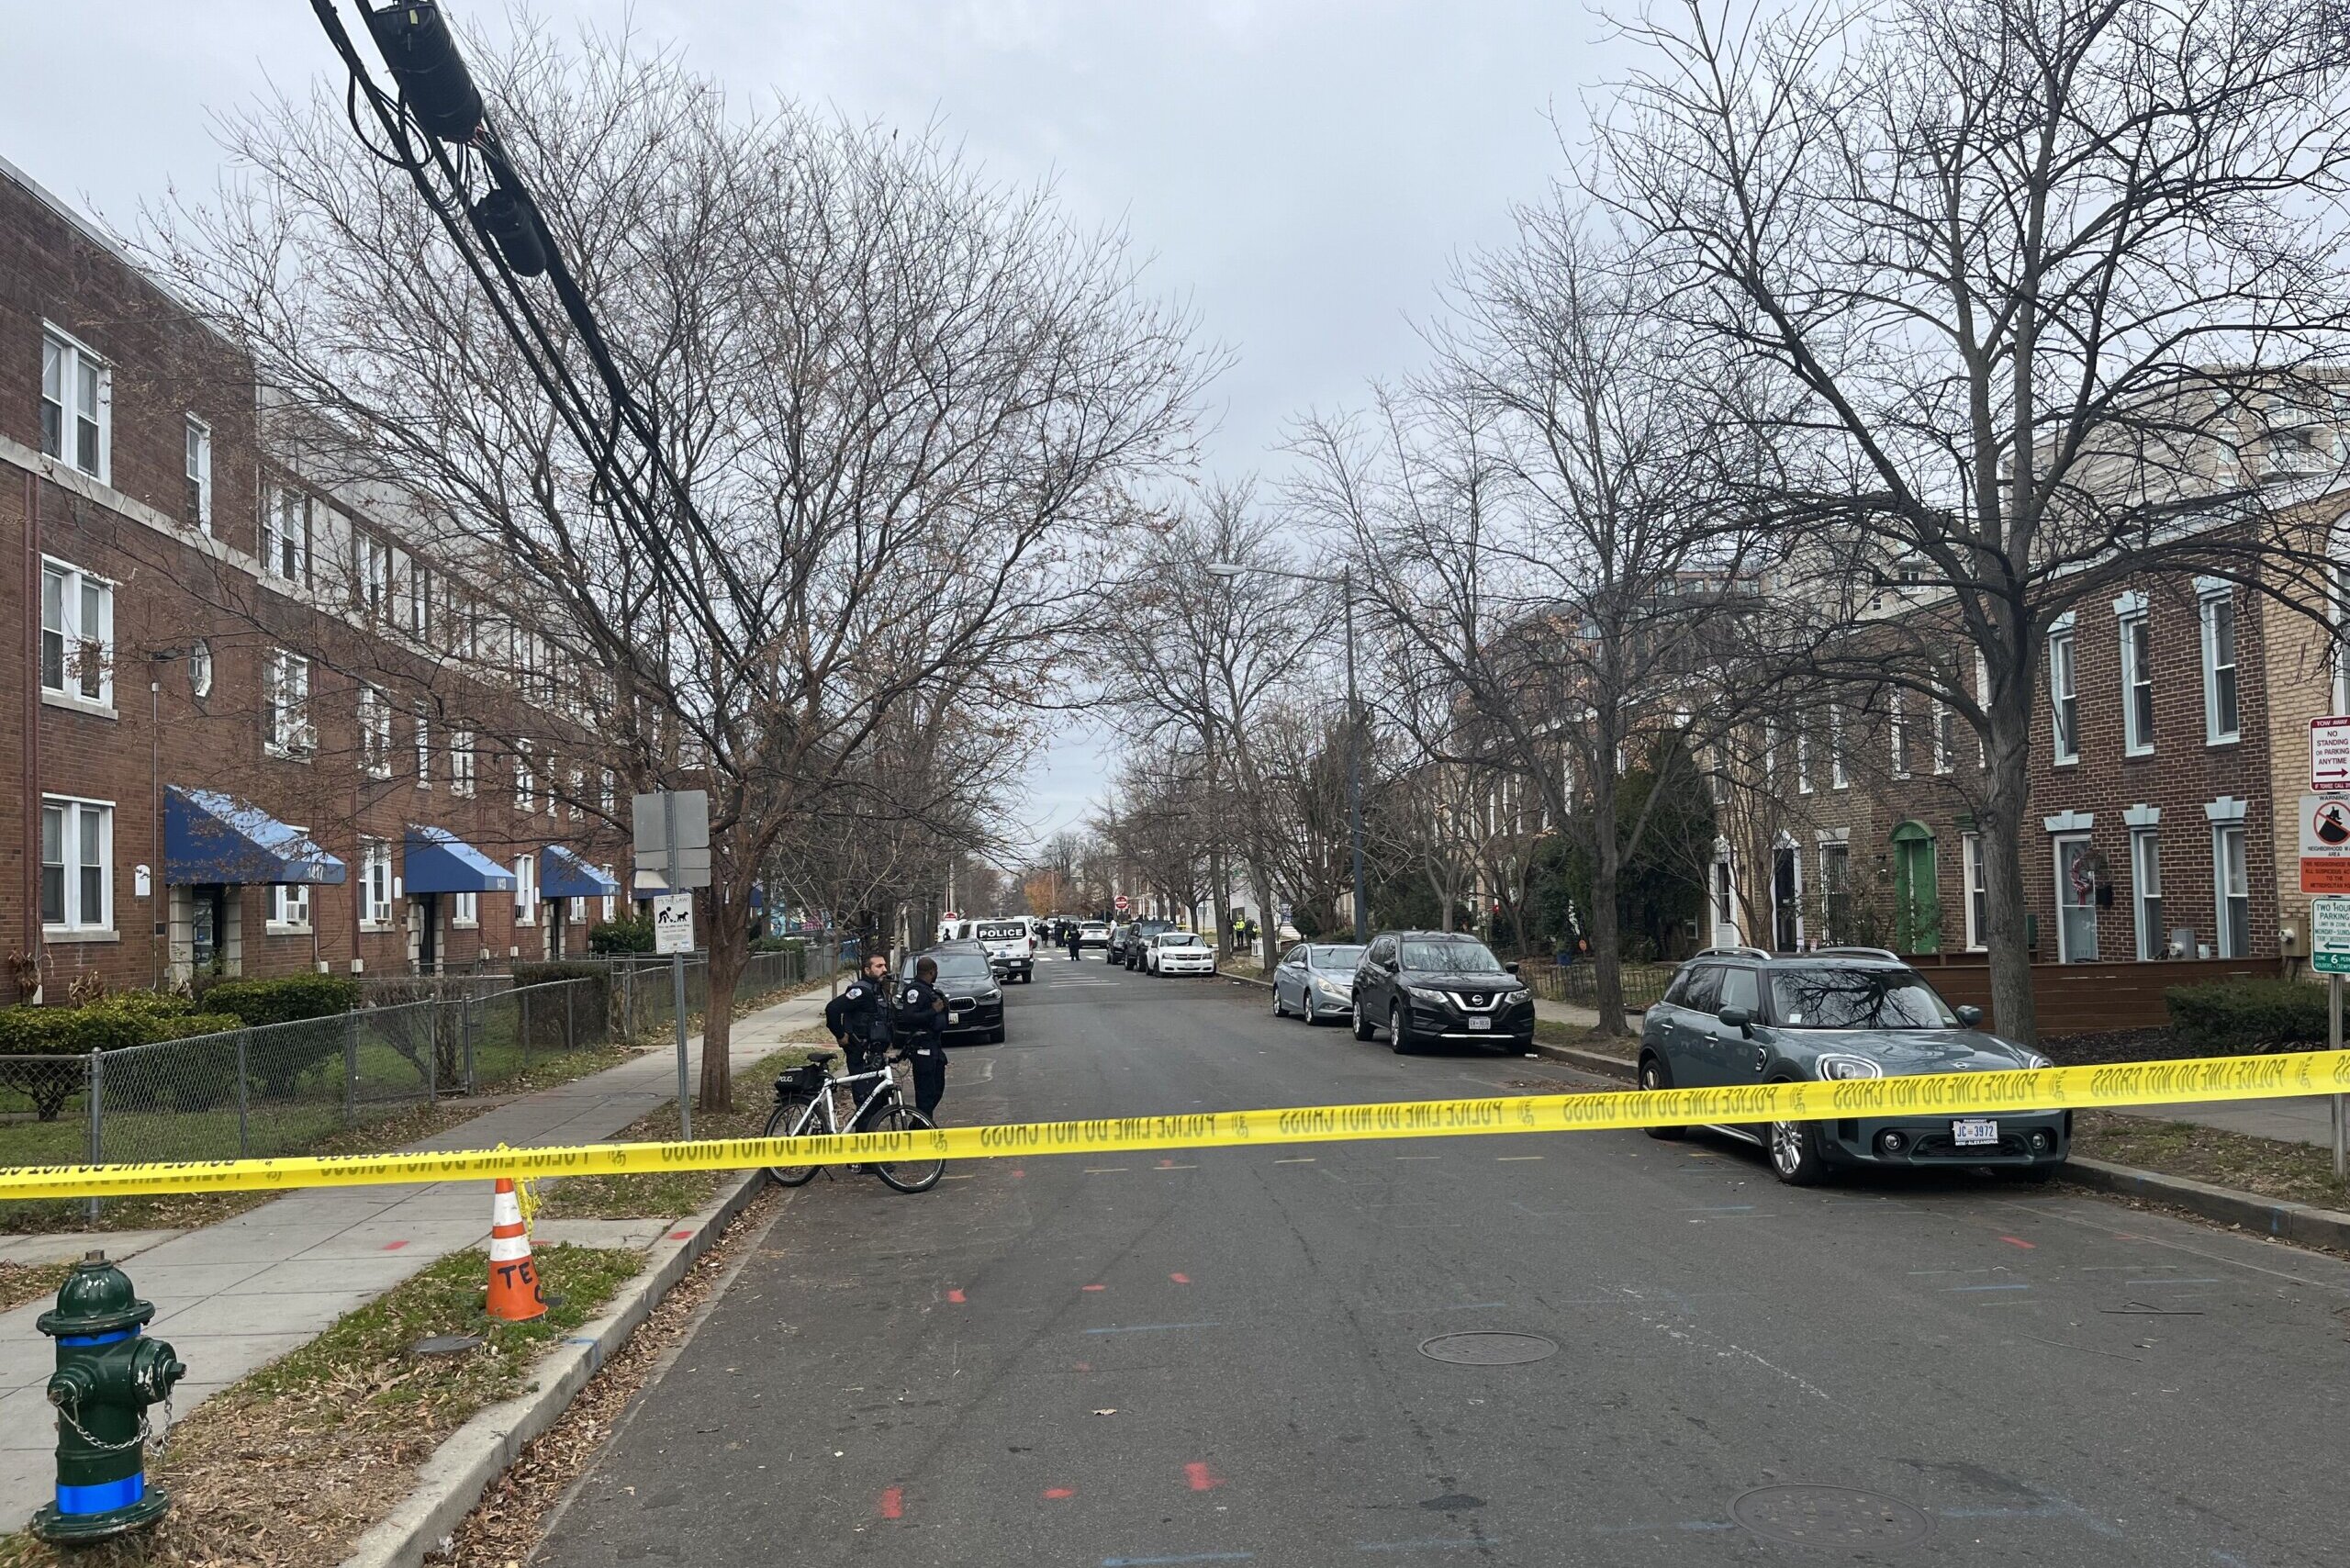 Police: 2 victims identified in quadruple Southwest DC shooting - WTOP News